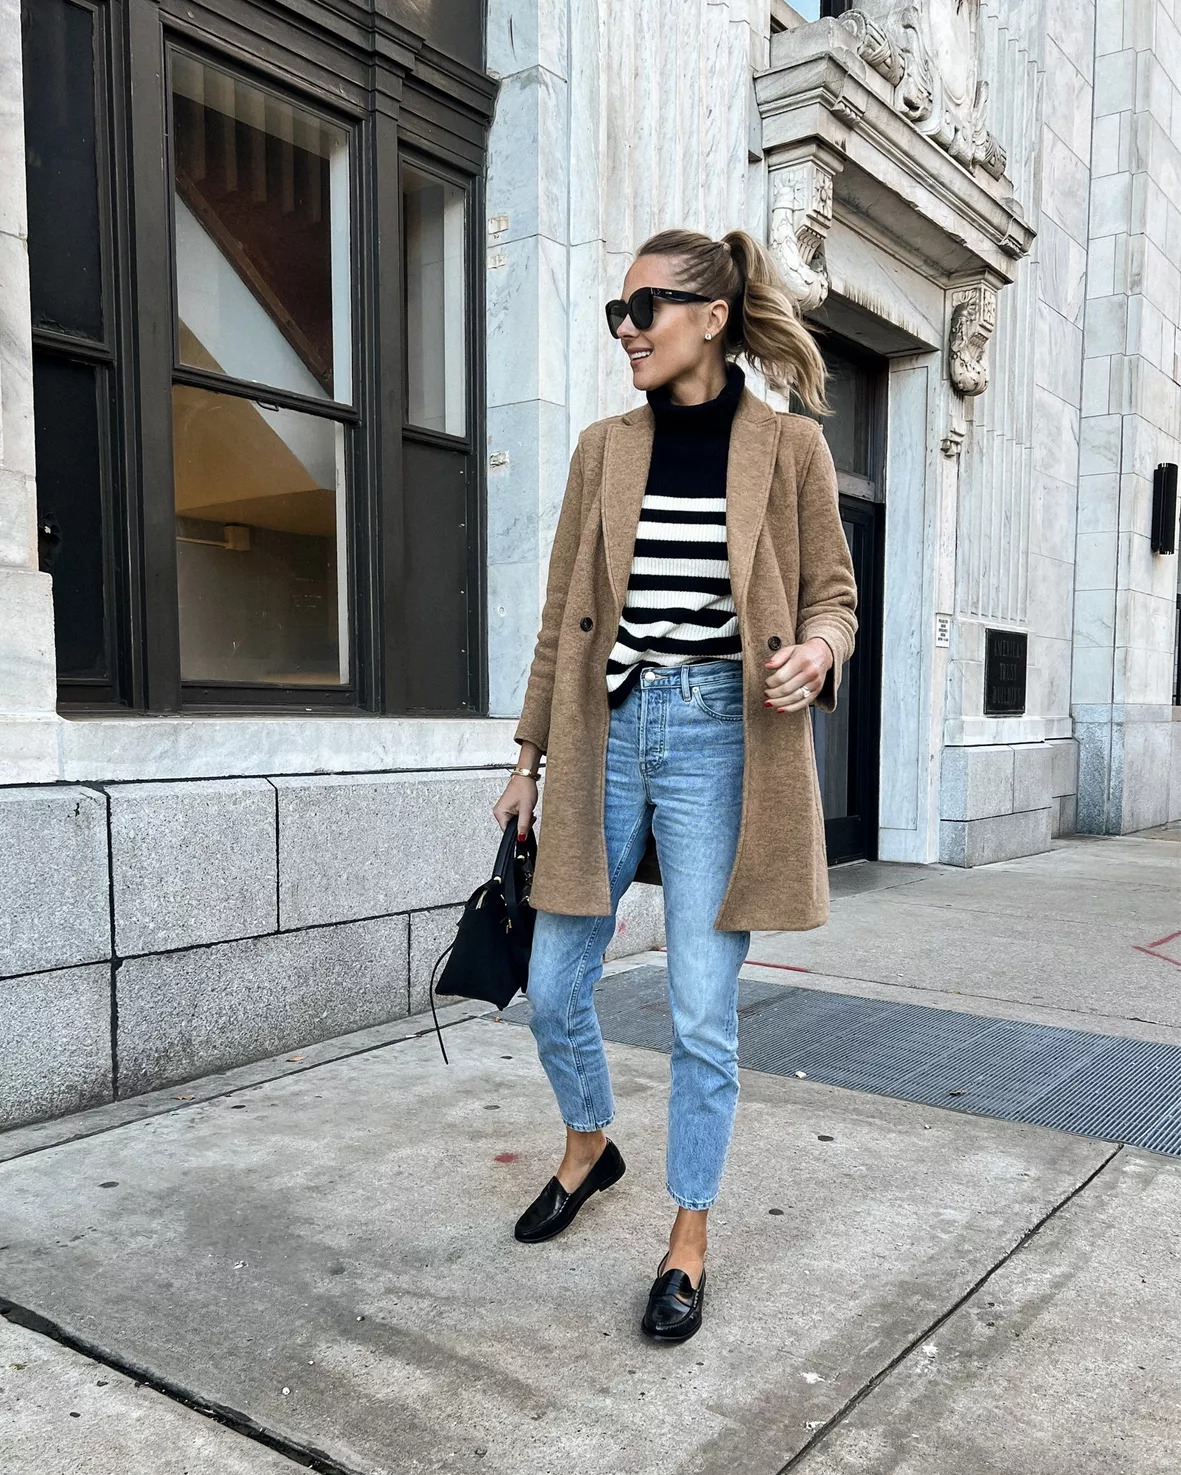 camel coat and jeans  Fashion jackson, Fashion outfits, Style